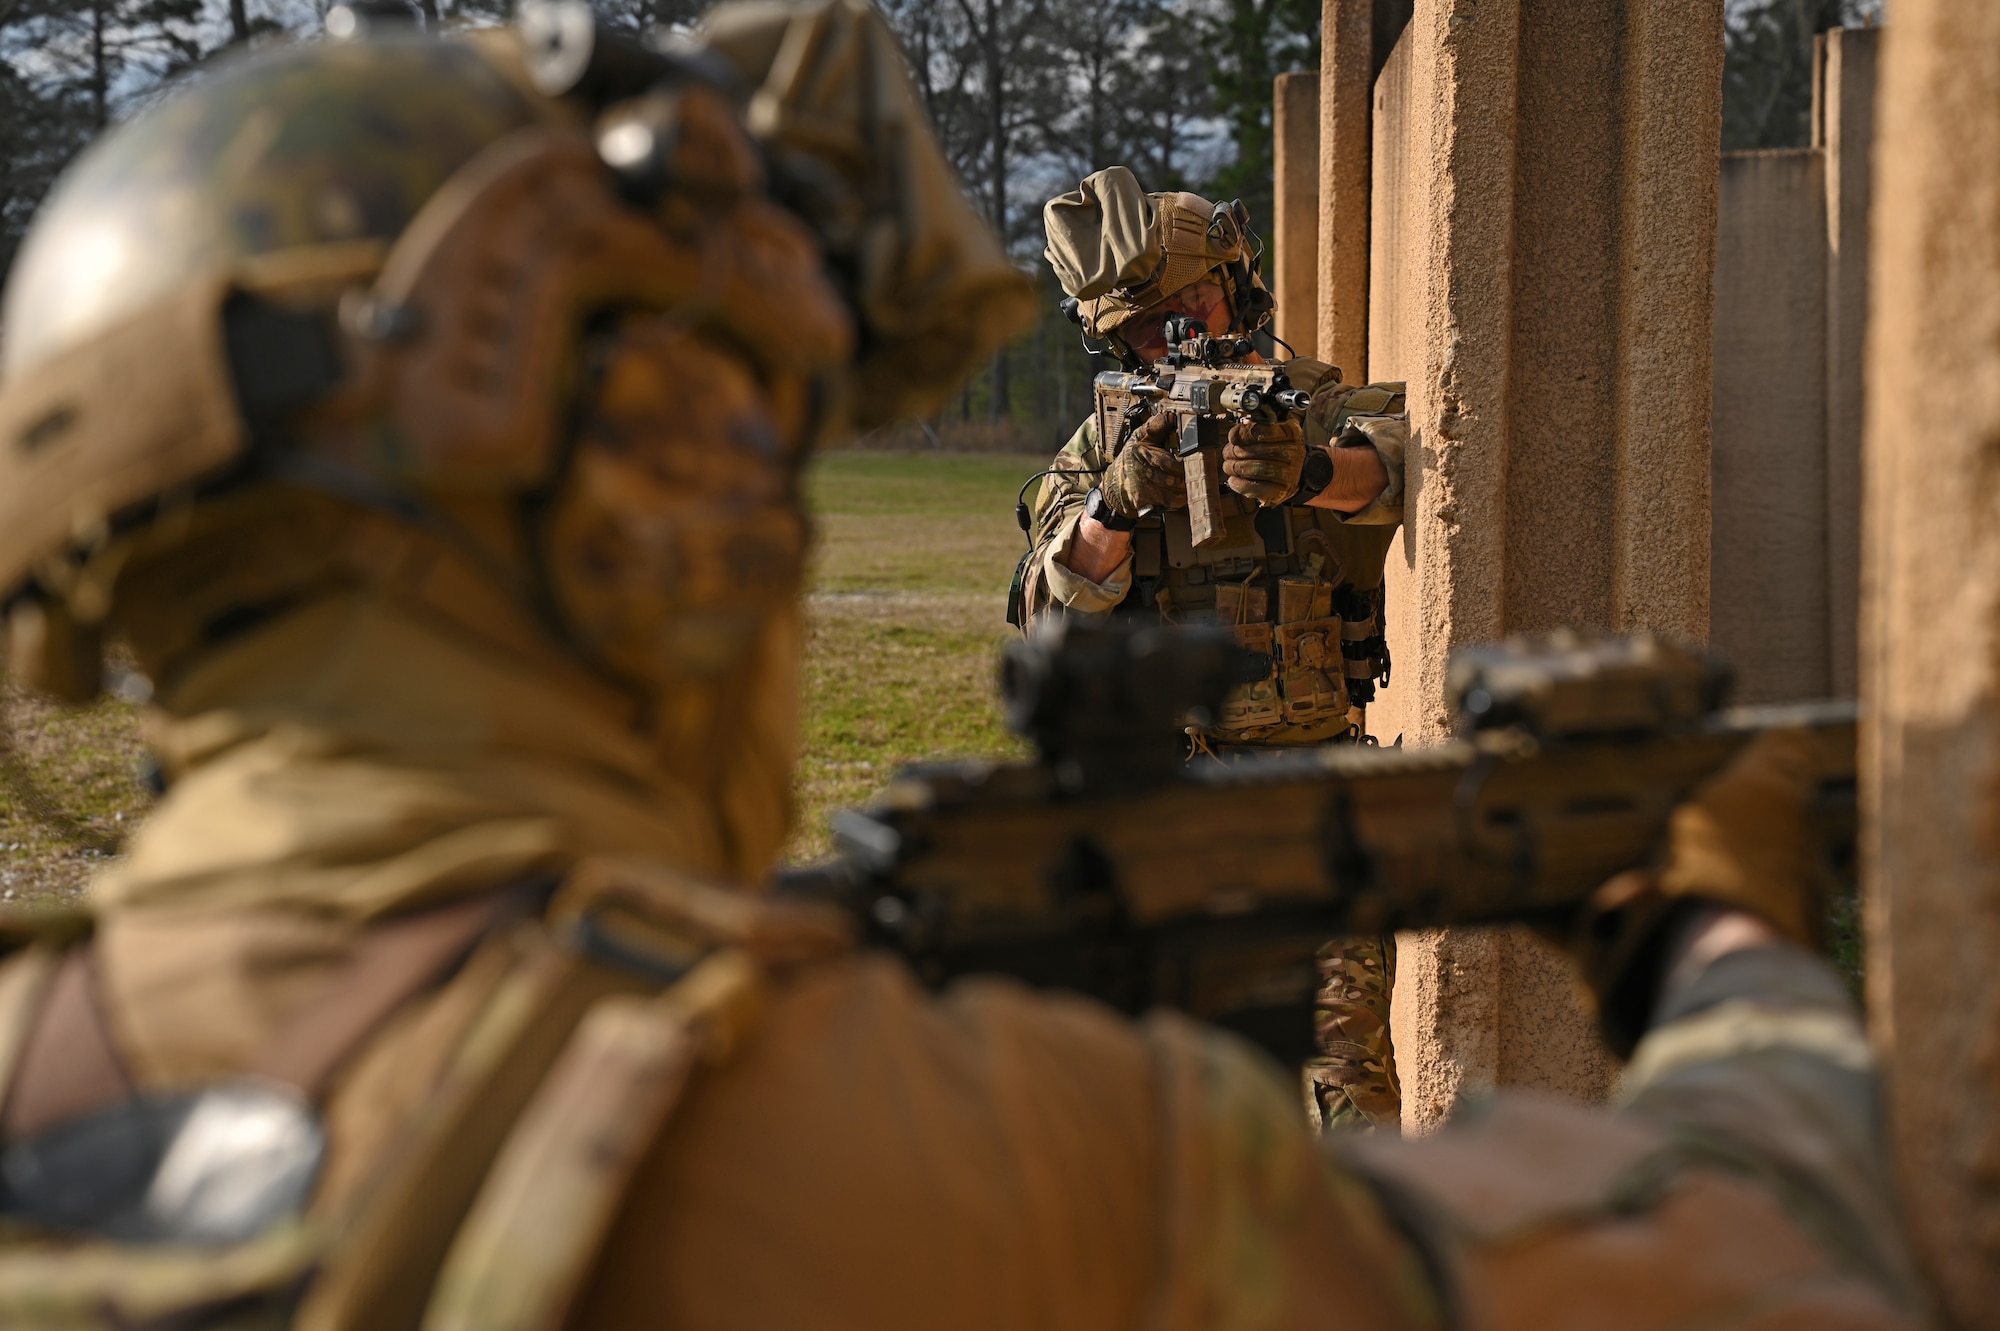 Members of the French Special Operations Forces peer into a courtyard during a raid on an opposing force-held village during Emerald Warrior 21.1, Feb. 25, 2021, at Camp Shelby, Mississippi. Emerald Warrior focused on U.S partner nation relationships while emphasizing joint force interoperability. (U.S. Air Force photo by Staff Sgt. Ridge Shan)